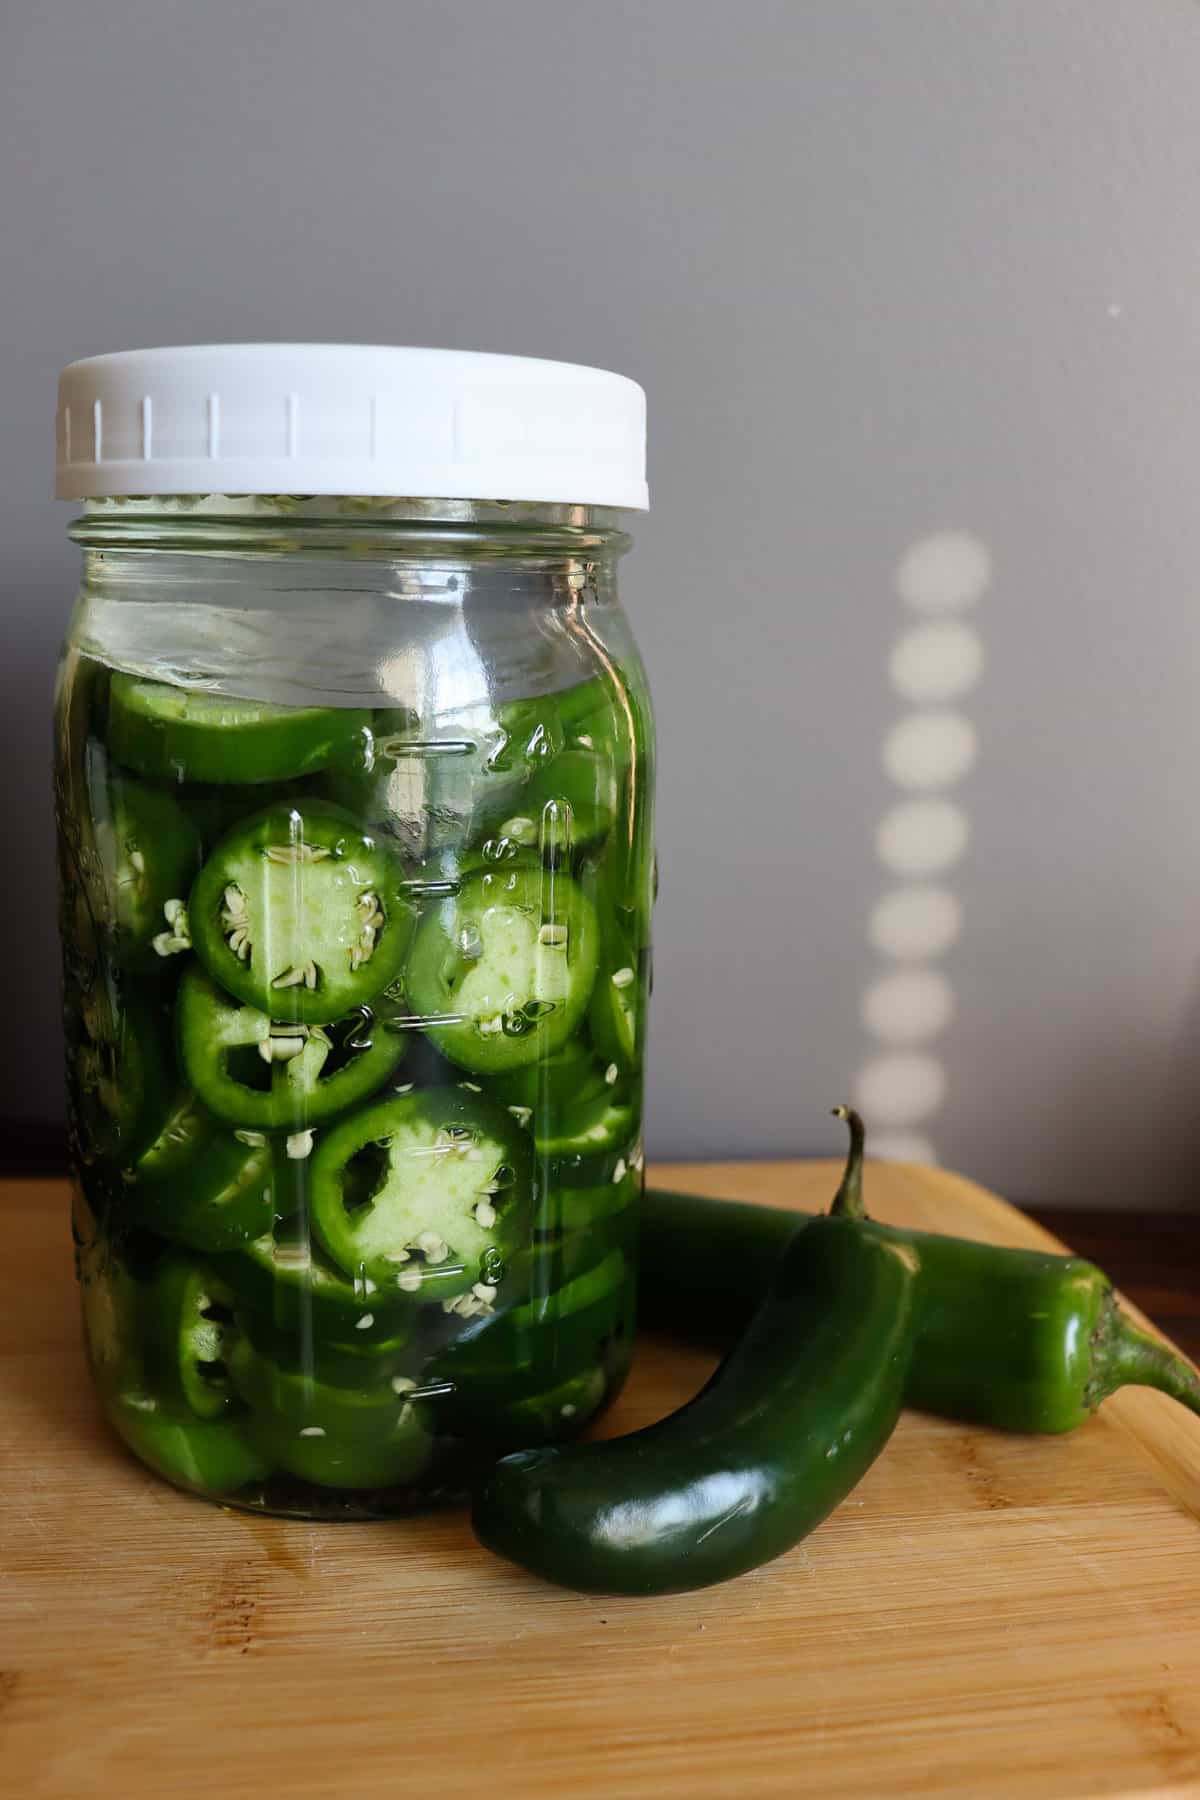 the jar is ready to ferment over time. it is next to whole jalapeños